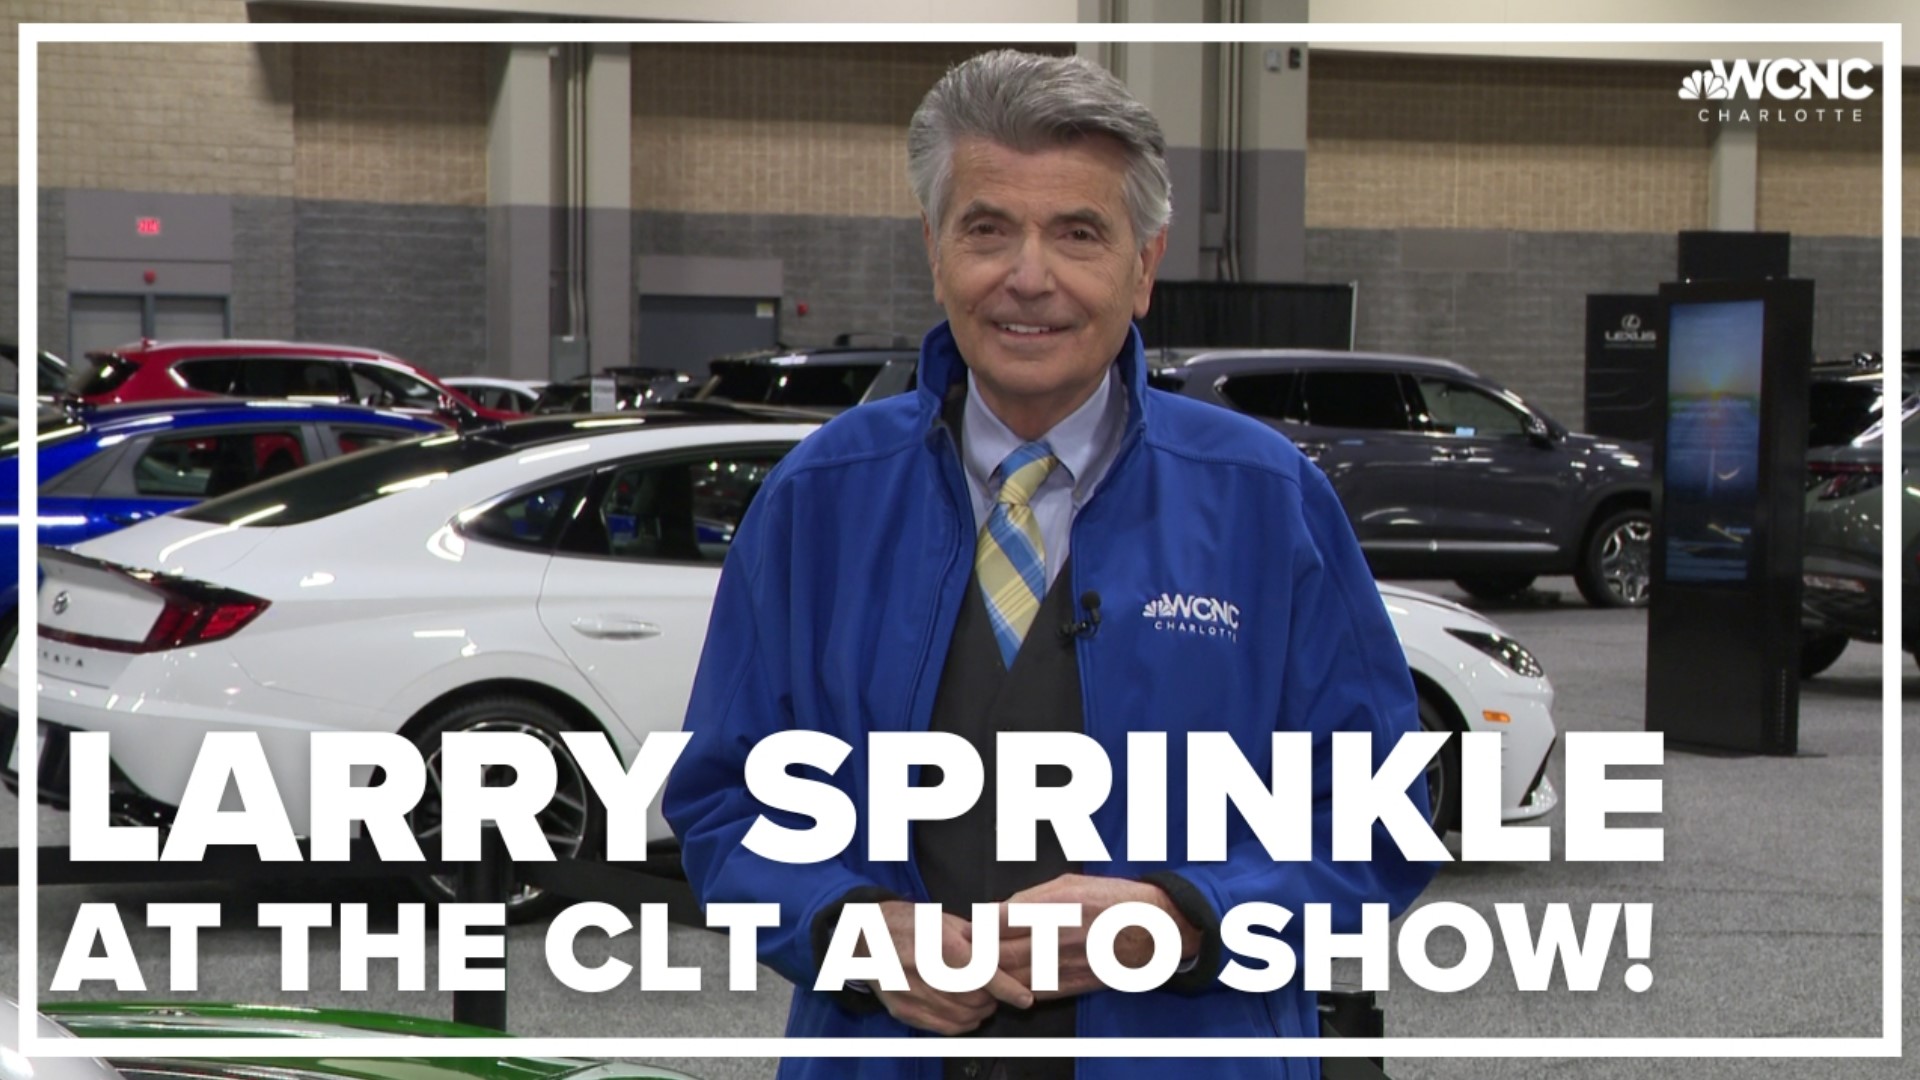 The Charlotte auto show is firing on all cylinders this weekend. Larry Sprinkle visits the show.